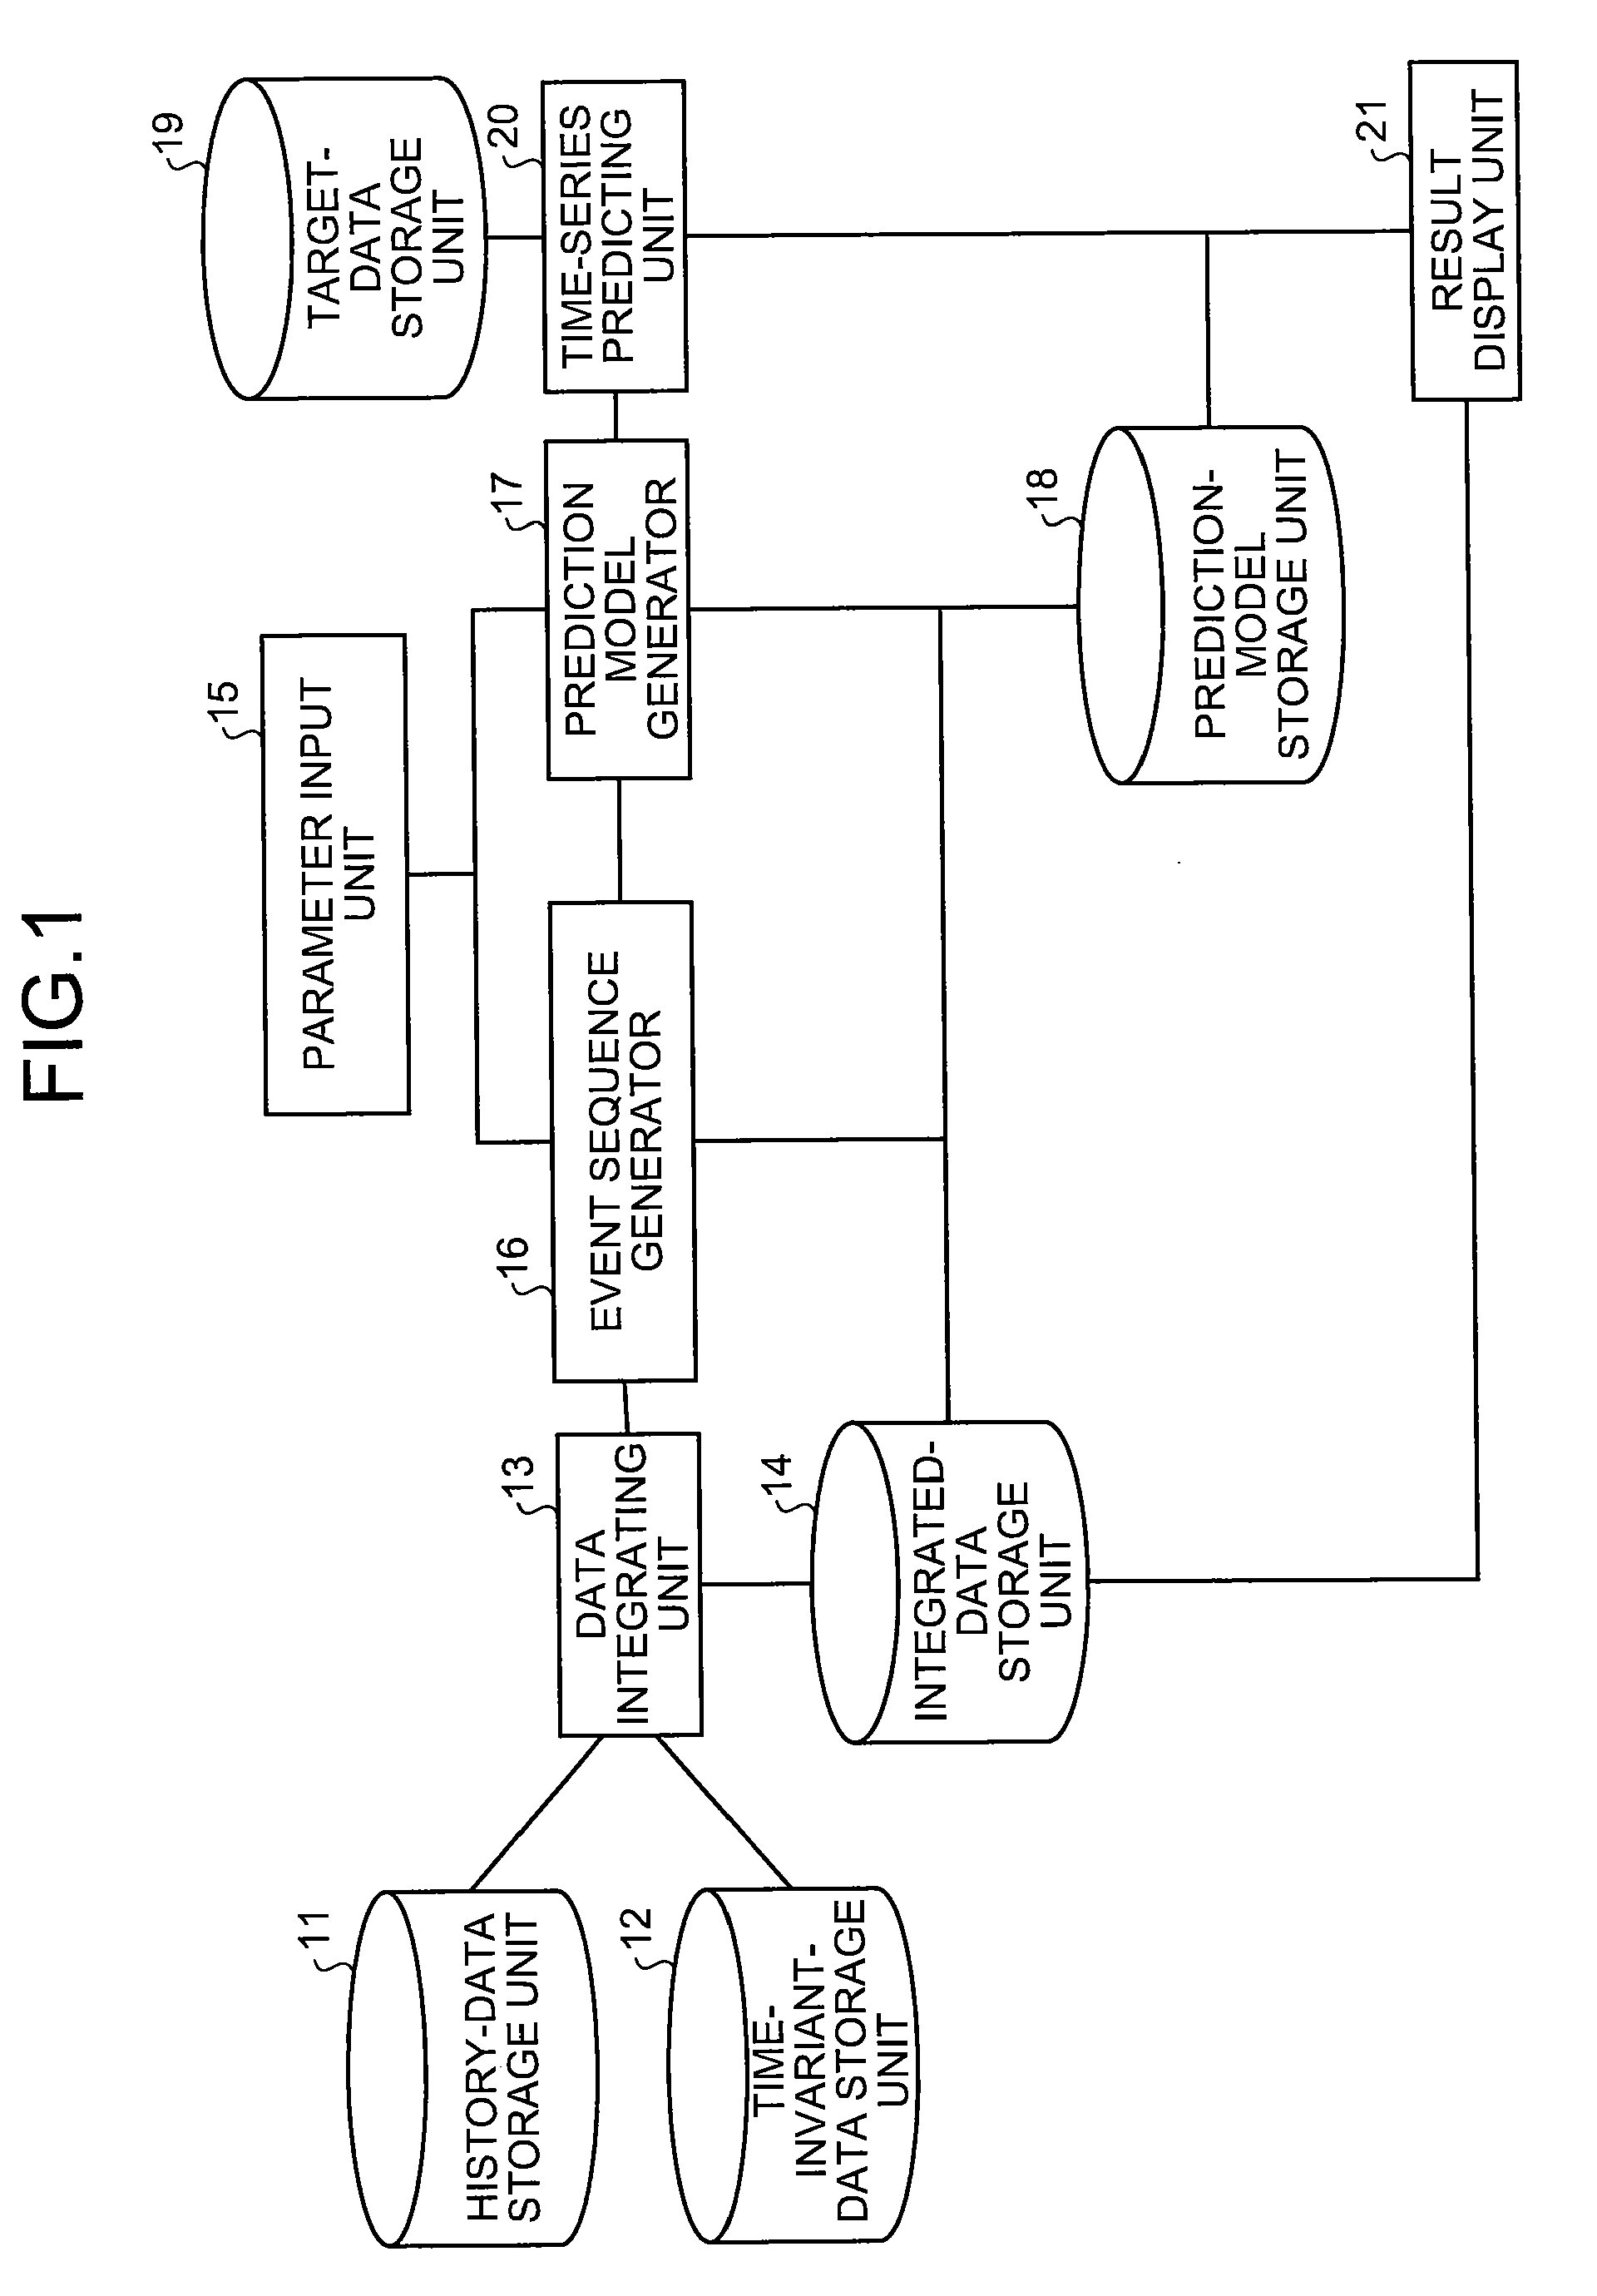 Time-series data analyzing apparatus, time-series data analyzing method, and computer program product